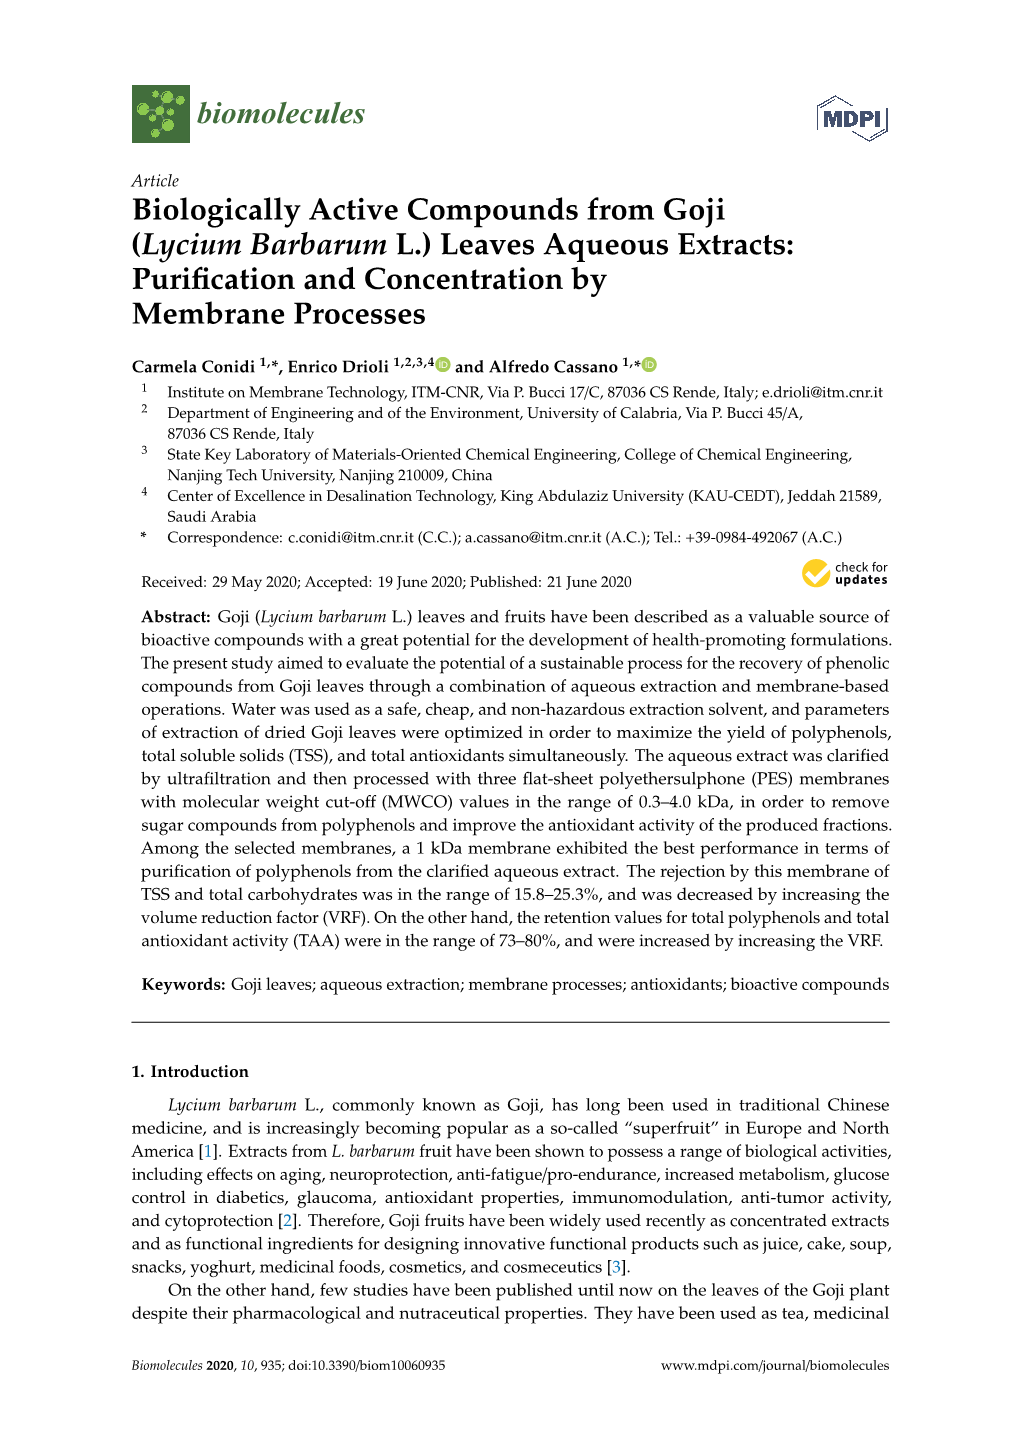 Biologically Active Compounds from Goji (Lycium Barbarum L.) Leaves Aqueous Extracts: Puriﬁcation and Concentration by Membrane Processes